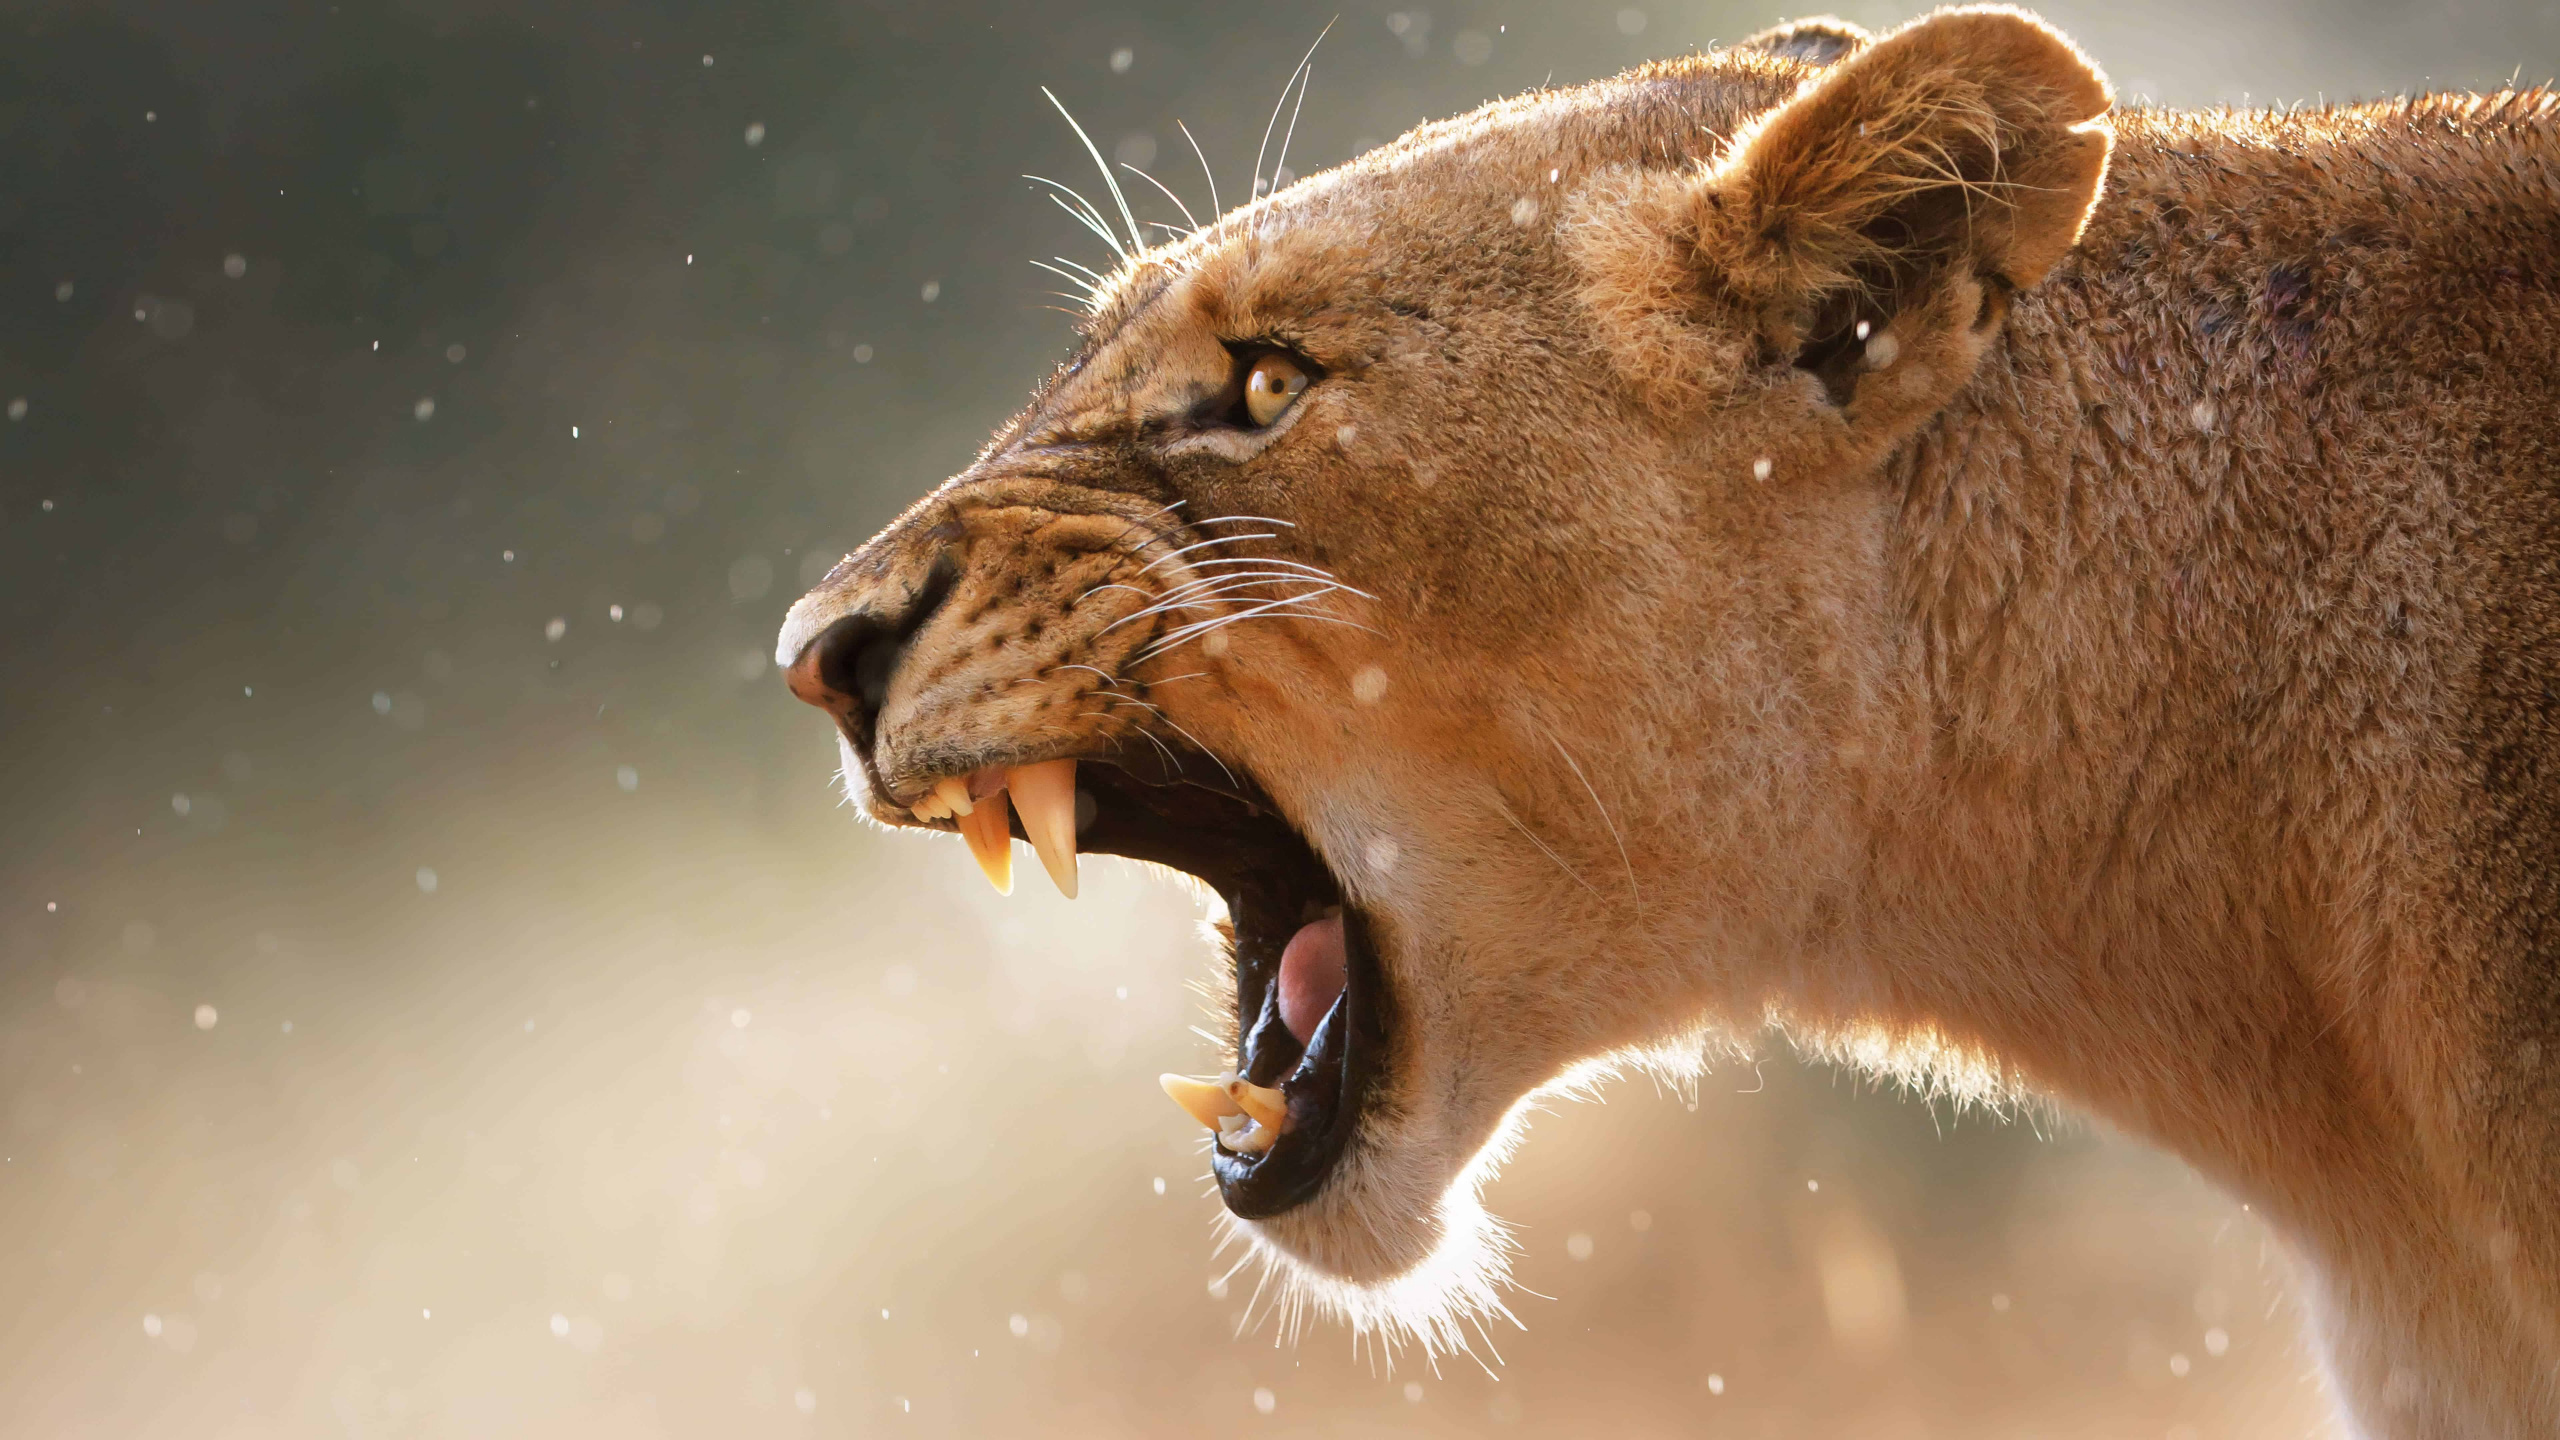 Brown Lion in Close up Photography. Wallpaper in 2560x1440 Resolution